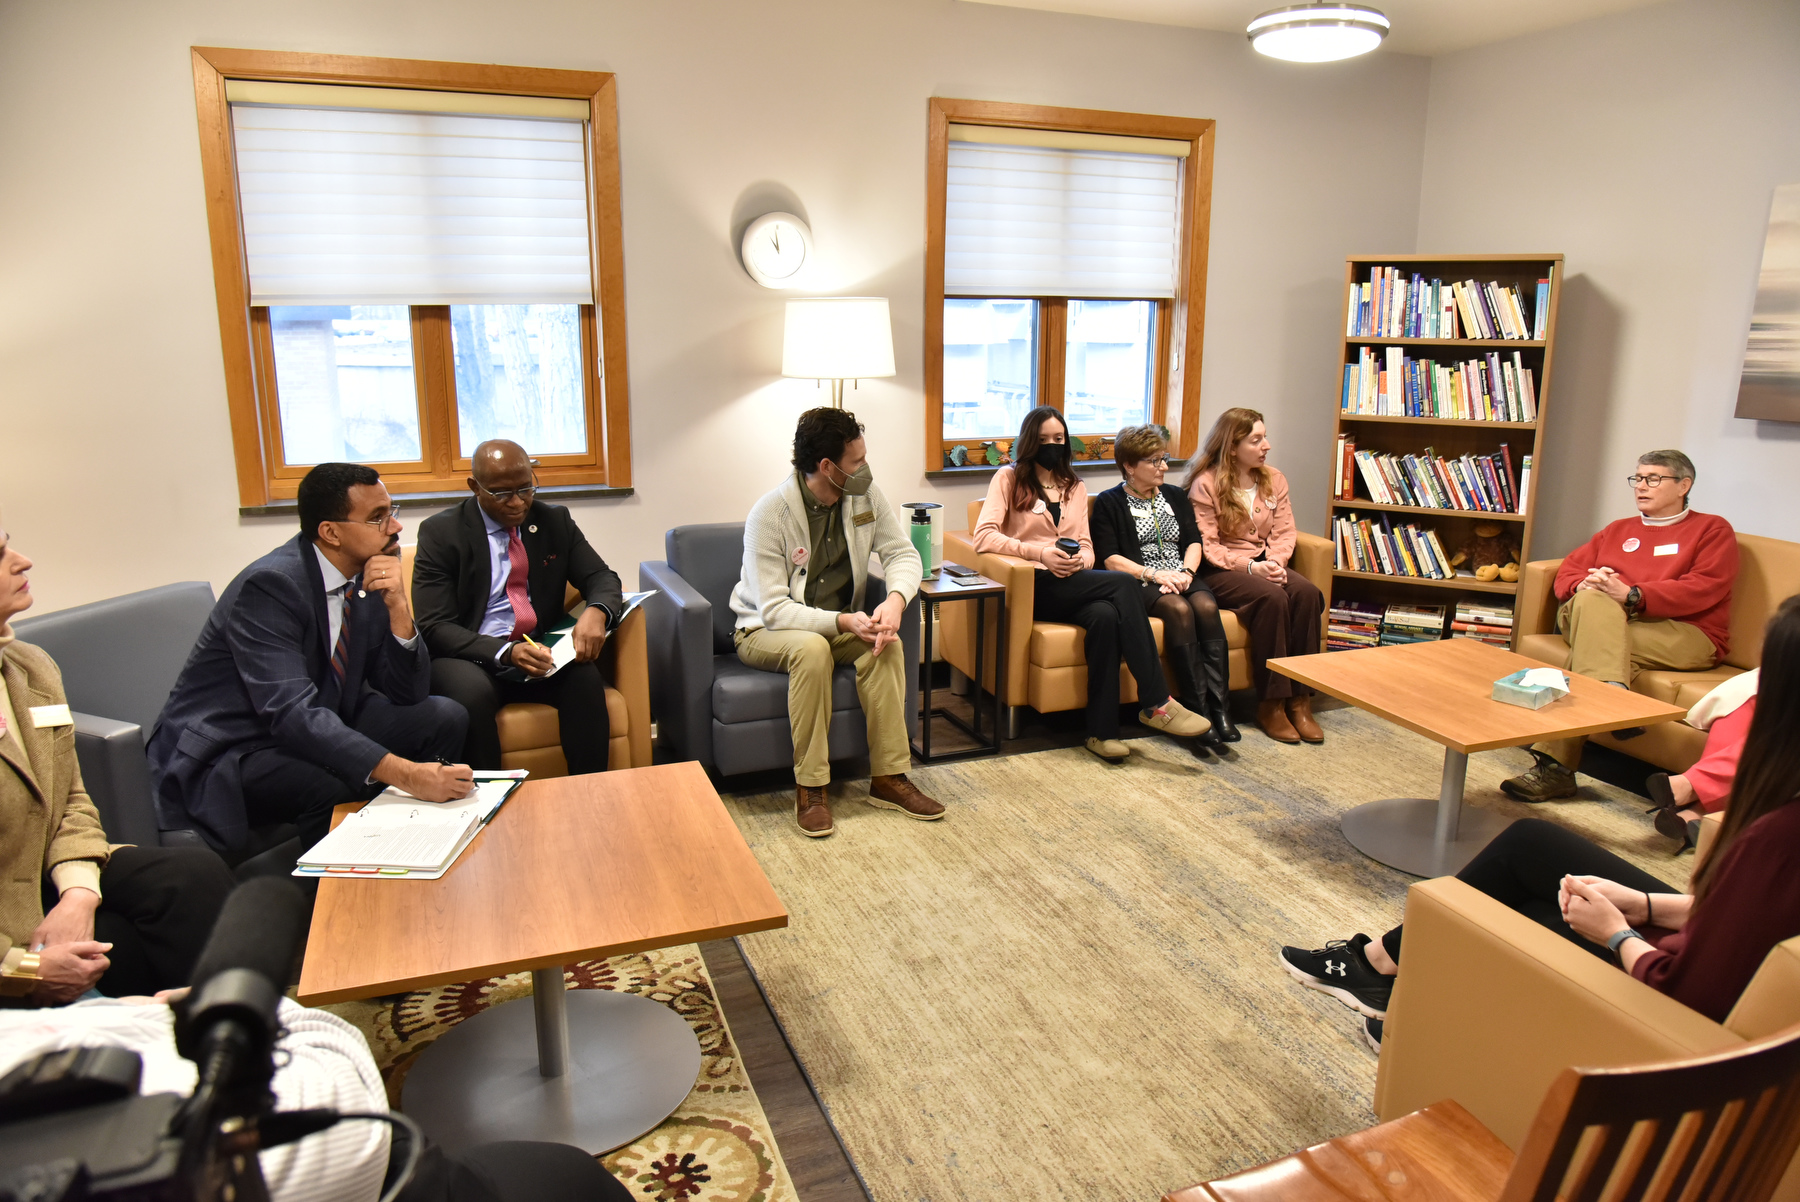 During SUNY Chancellor John B. King Jr.’s visit to SUNY Oswego on Feb. 14, he and President Peter O. Nwosu met with Counseling Services staff at Mary Walker Health Center.